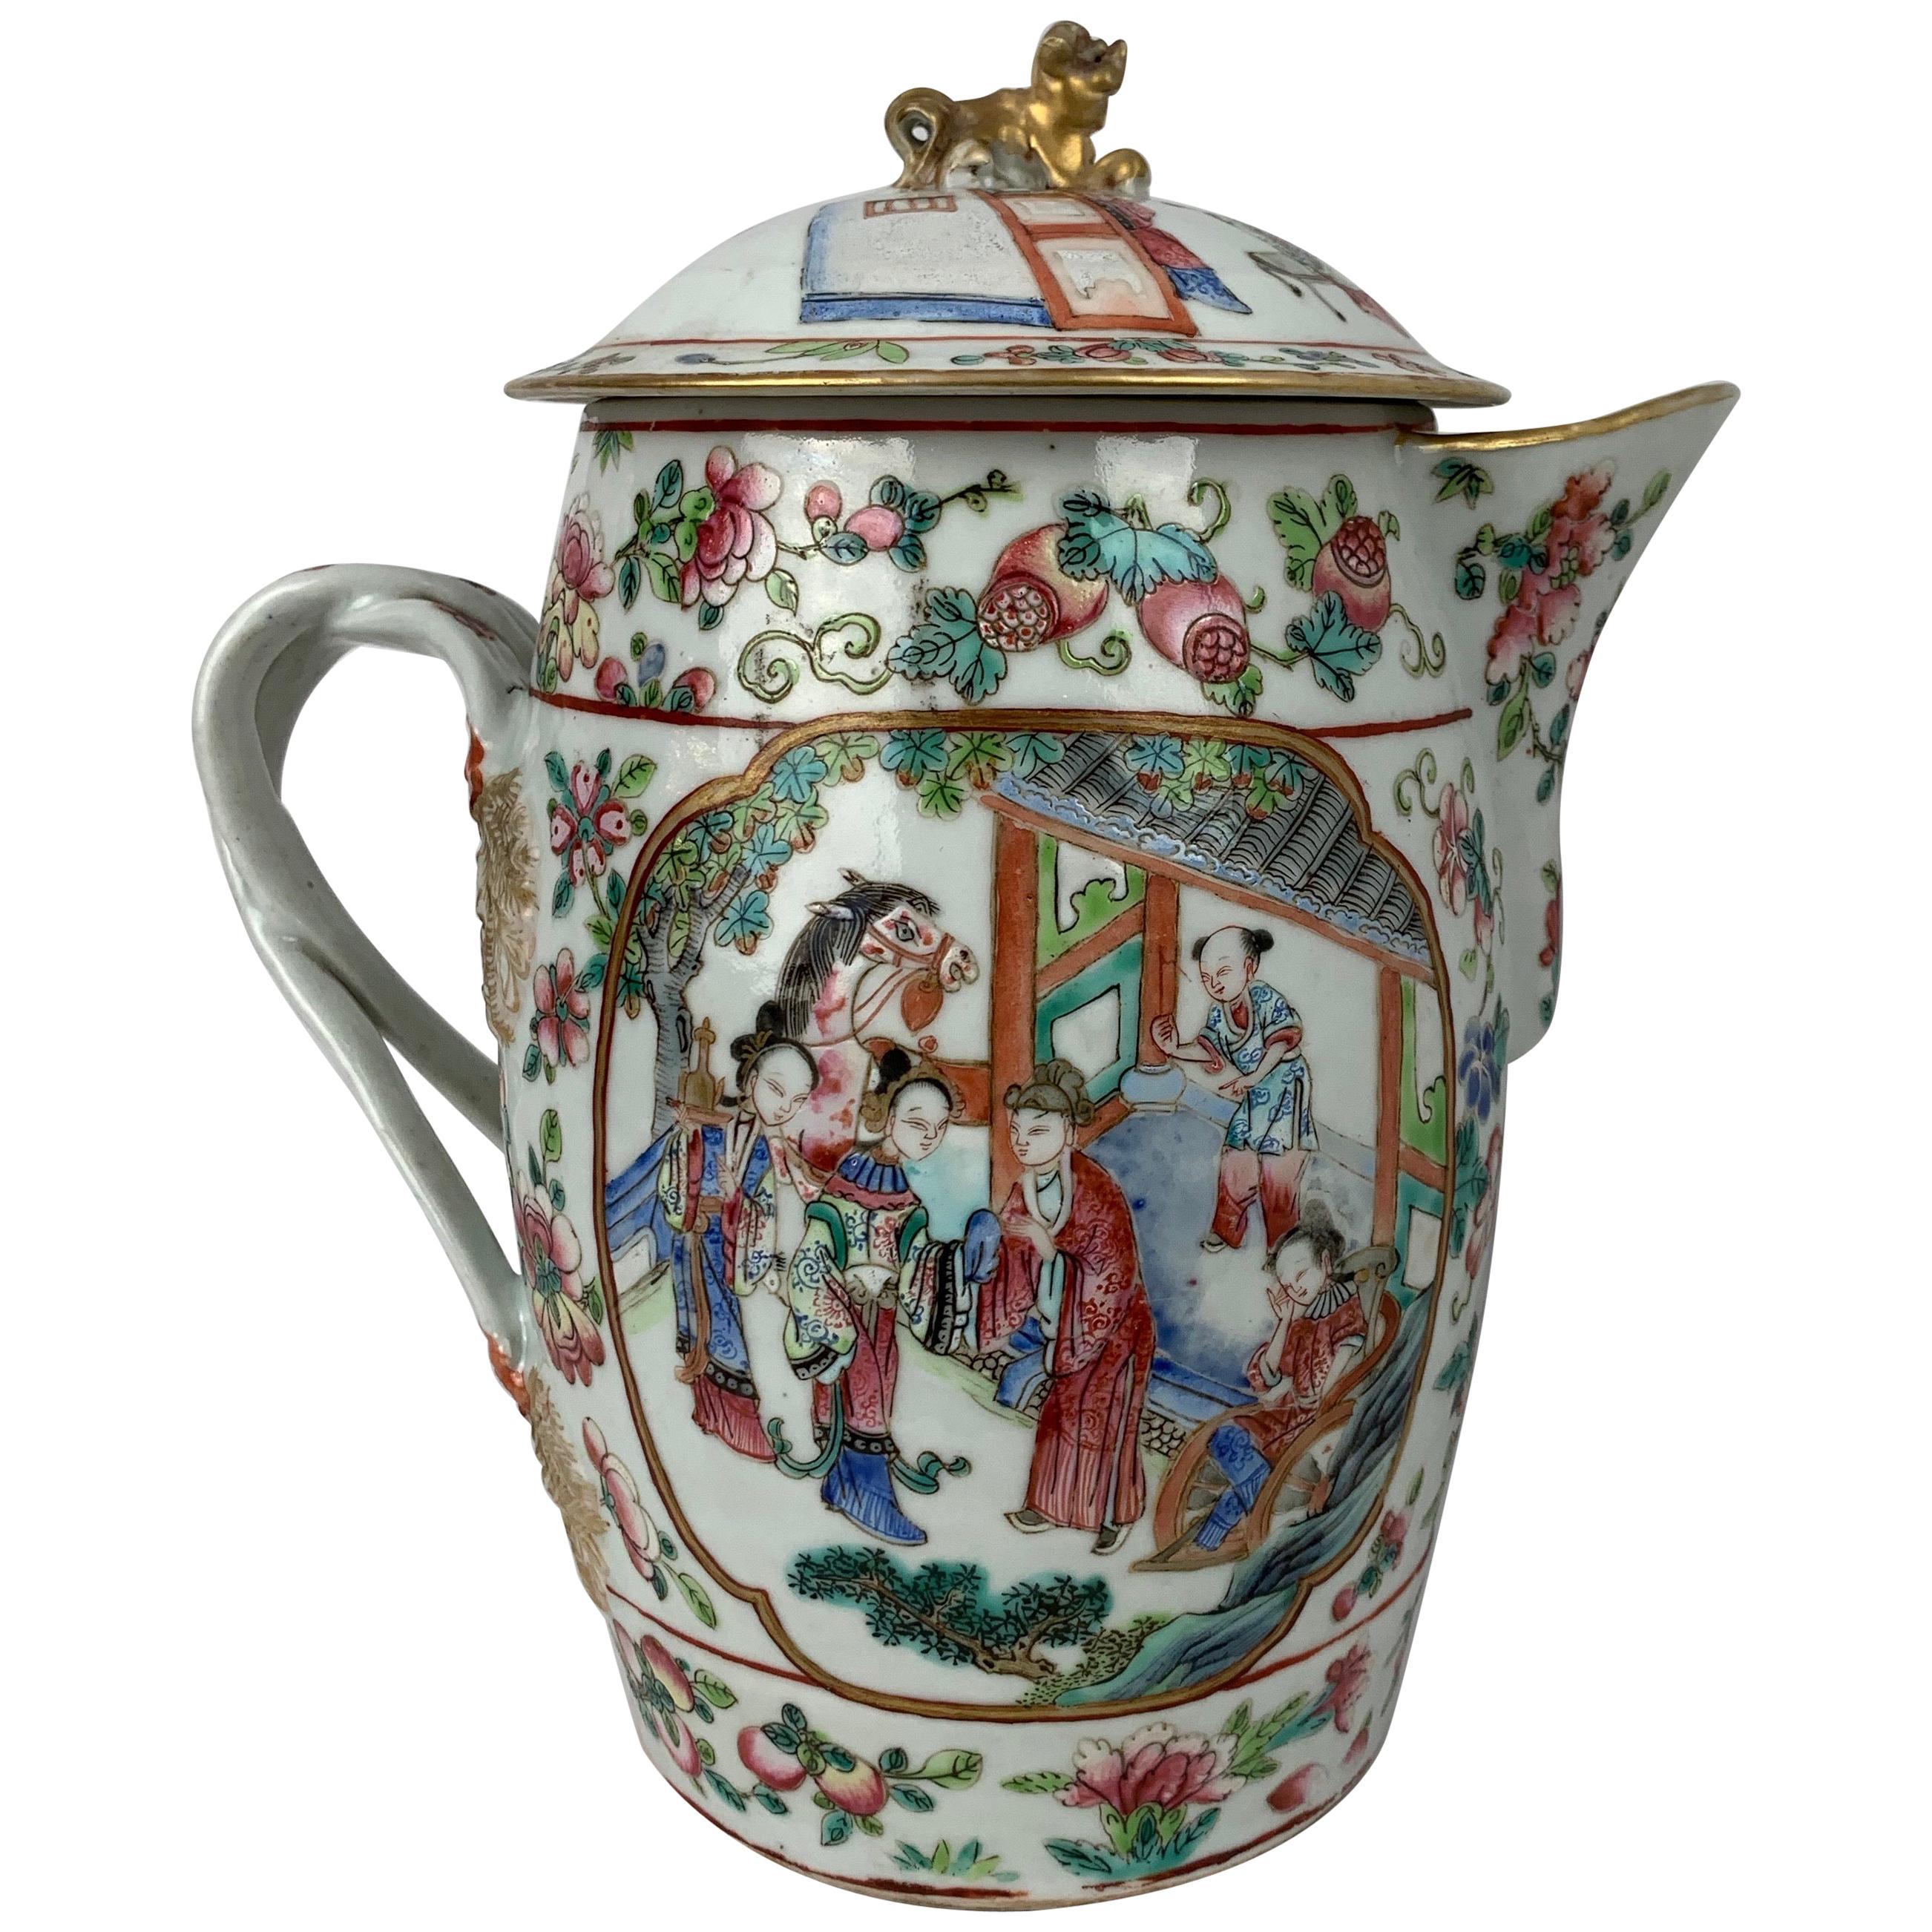 Chinese Export Cider Jug with Cover, Famille Rose Porcelain, 19th Century